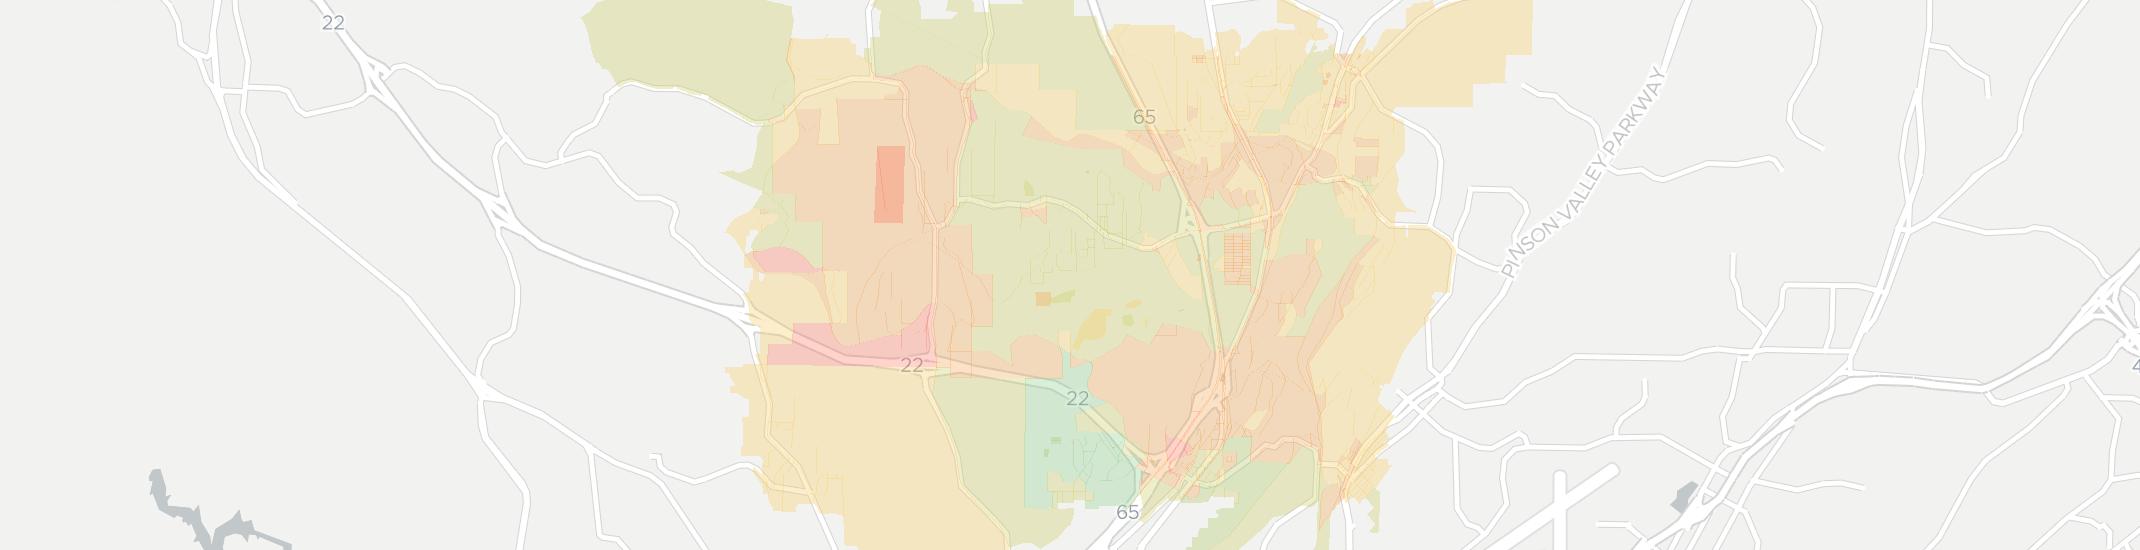 Fultondale Internet Competition Map. Click for interactive map